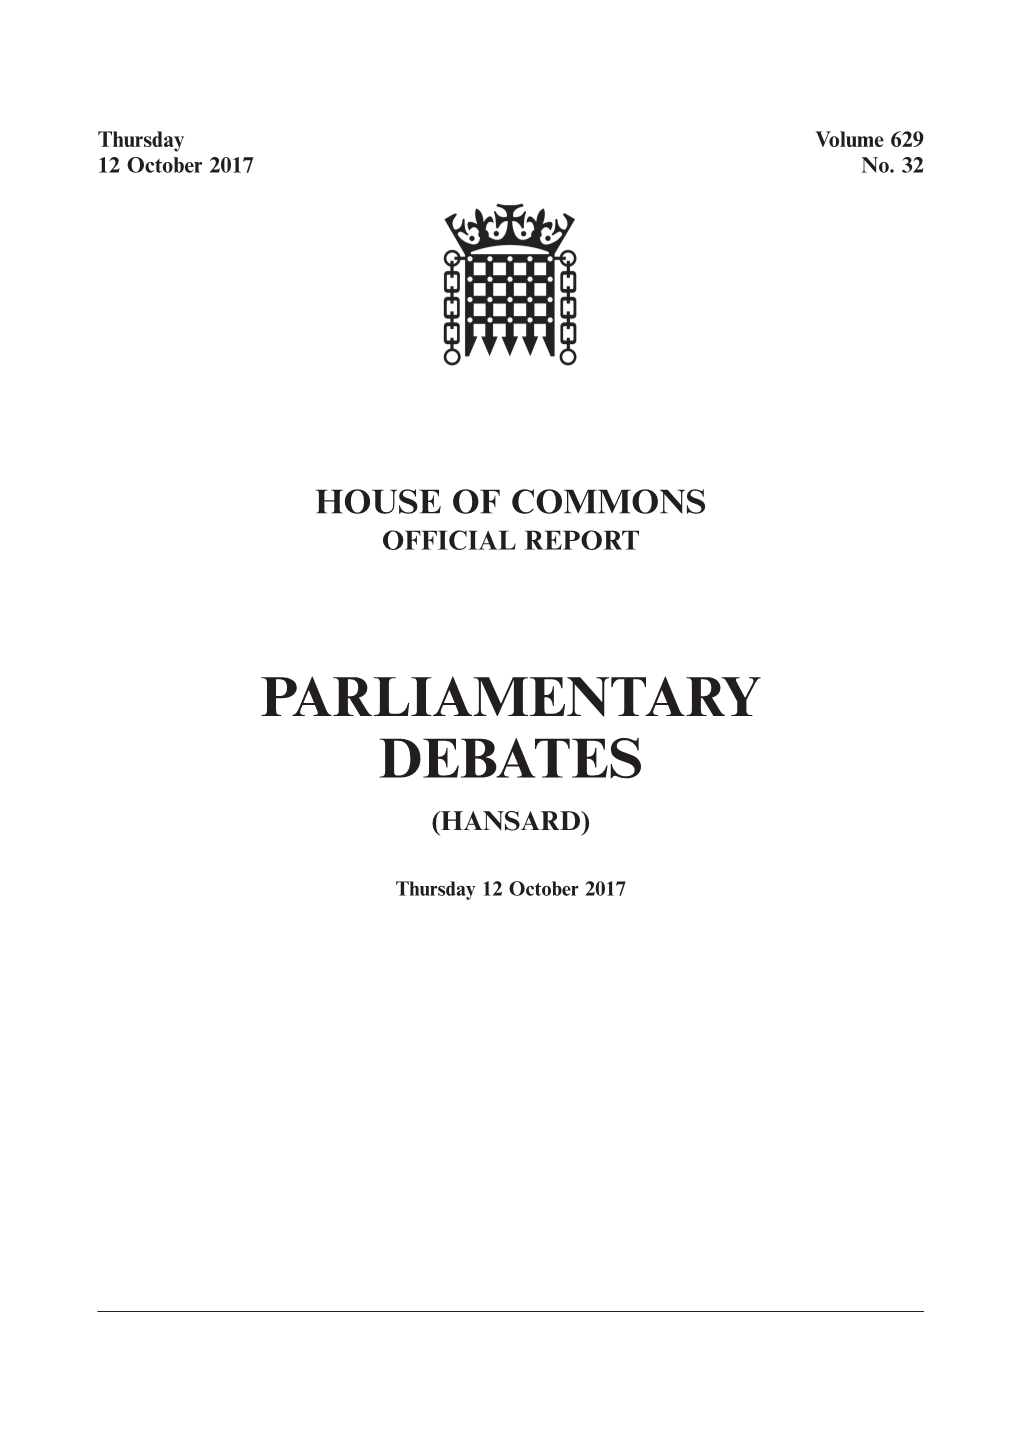 Whole Day Download the Hansard Record of the Entire Day in PDF Format. PDF File, 1.03